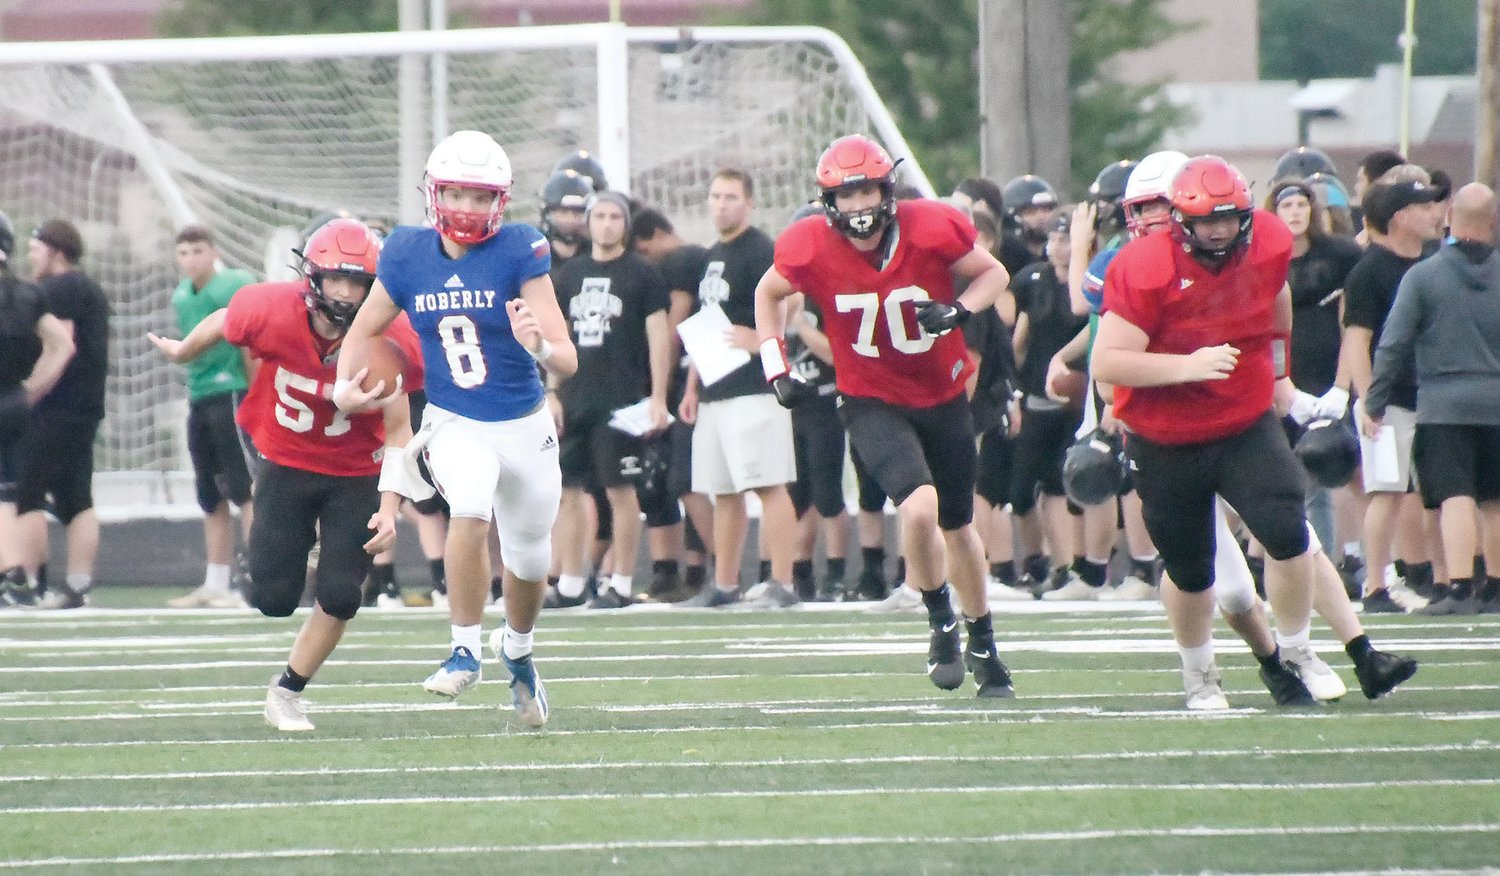 Collin Huffman breaks into the clear, scrambling for extra yards during the scrimmage versus Southern Boone.